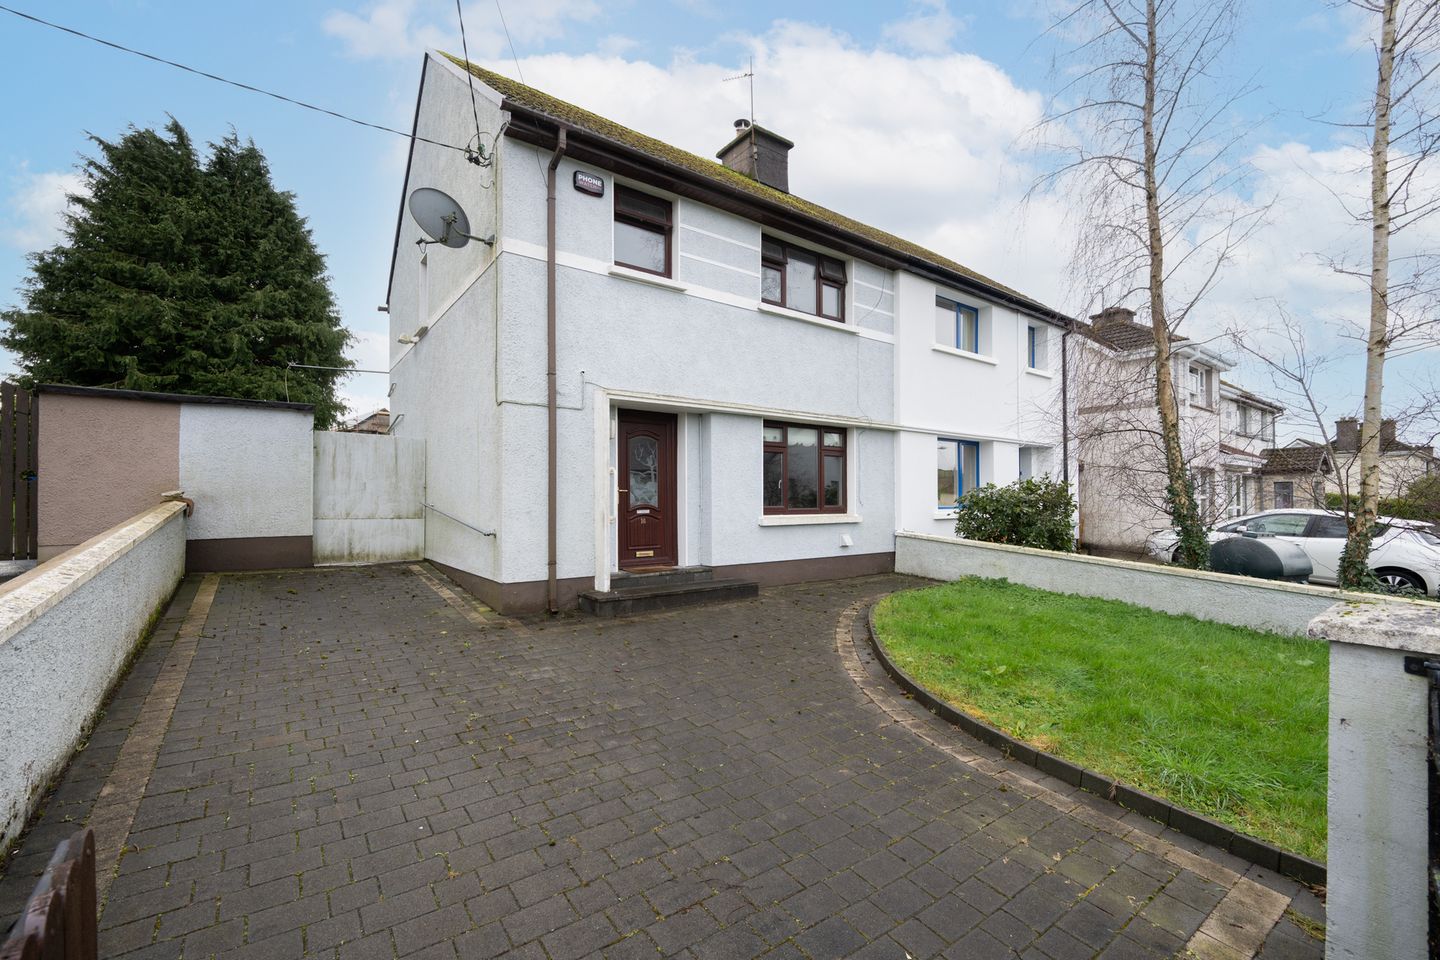 16 Saint Mary's Place, Carrigrohane, Co. Cork, T12VX6Y